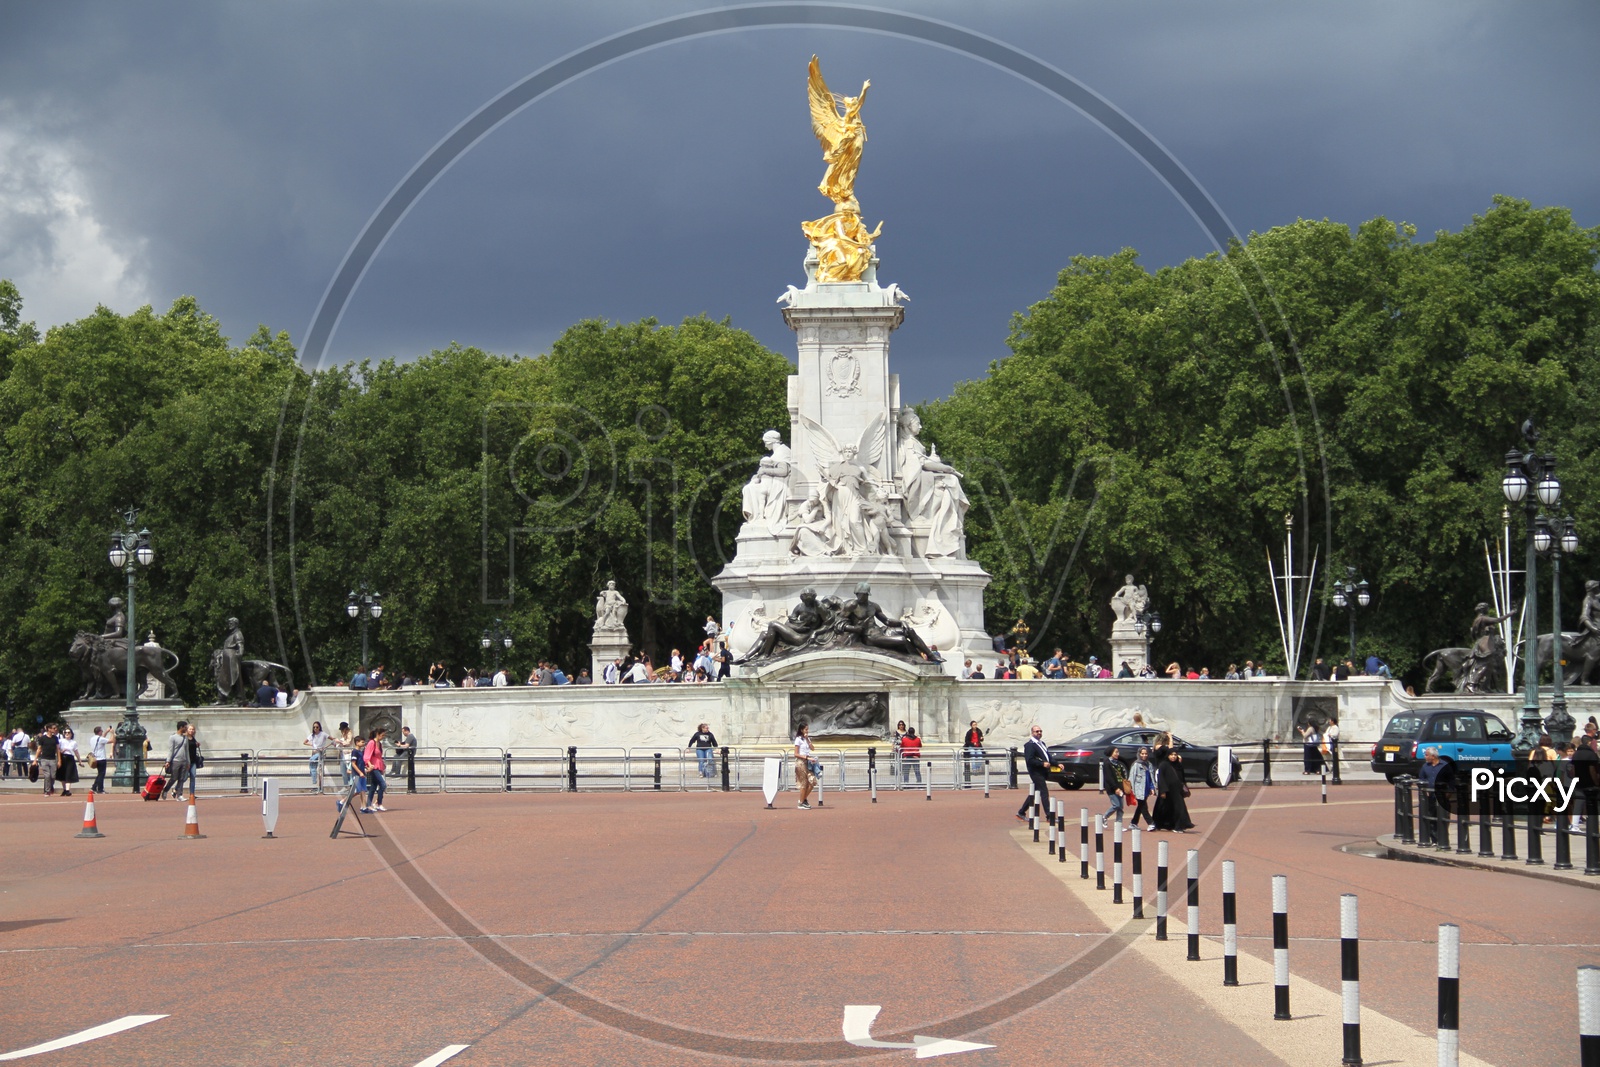 The Victoria Memorial at Buckingham Palace